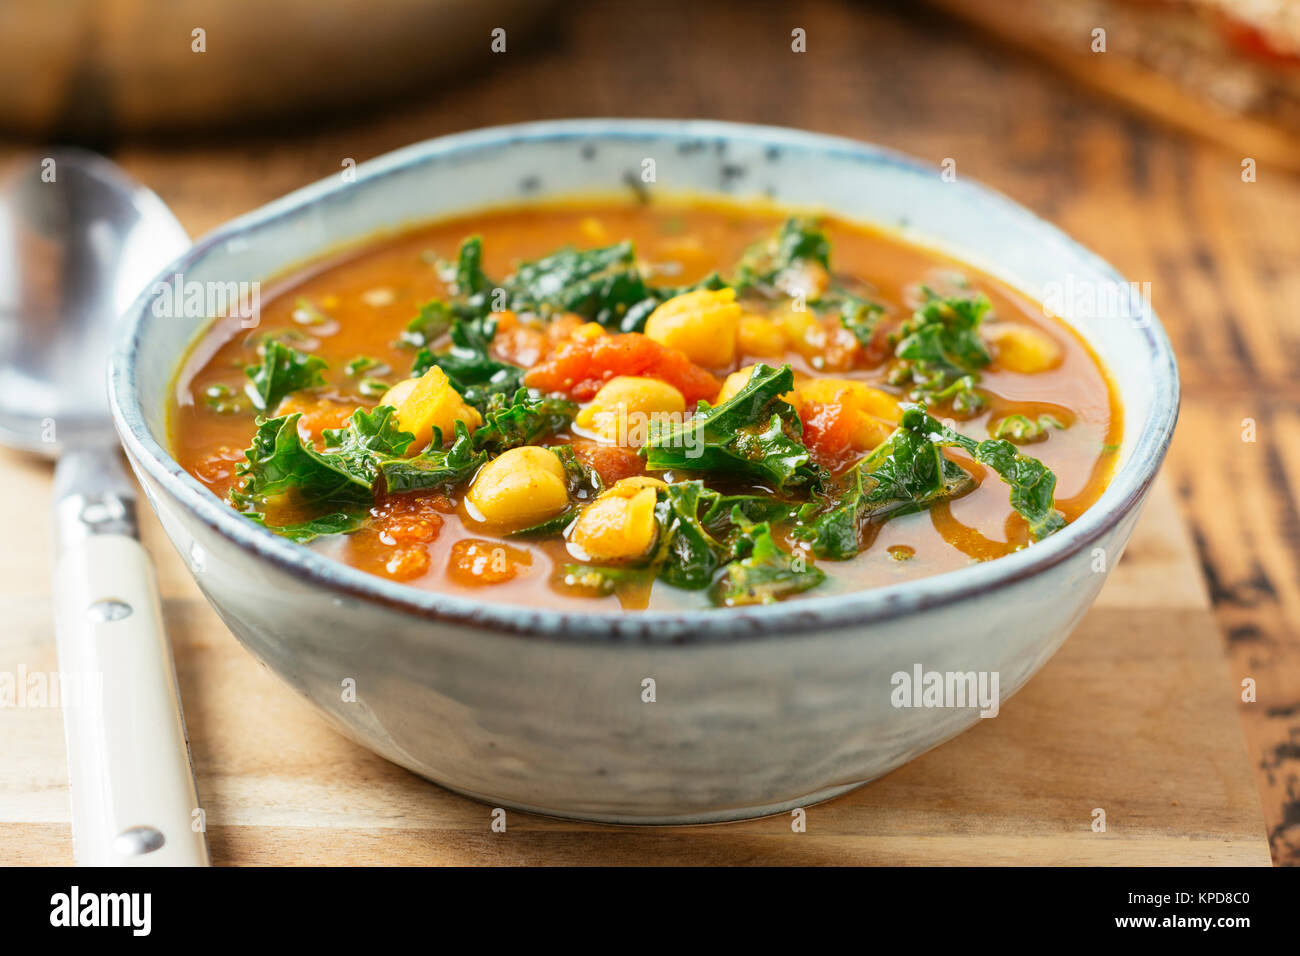 Moroccan Spiced Chickpea Soup Stock Photo